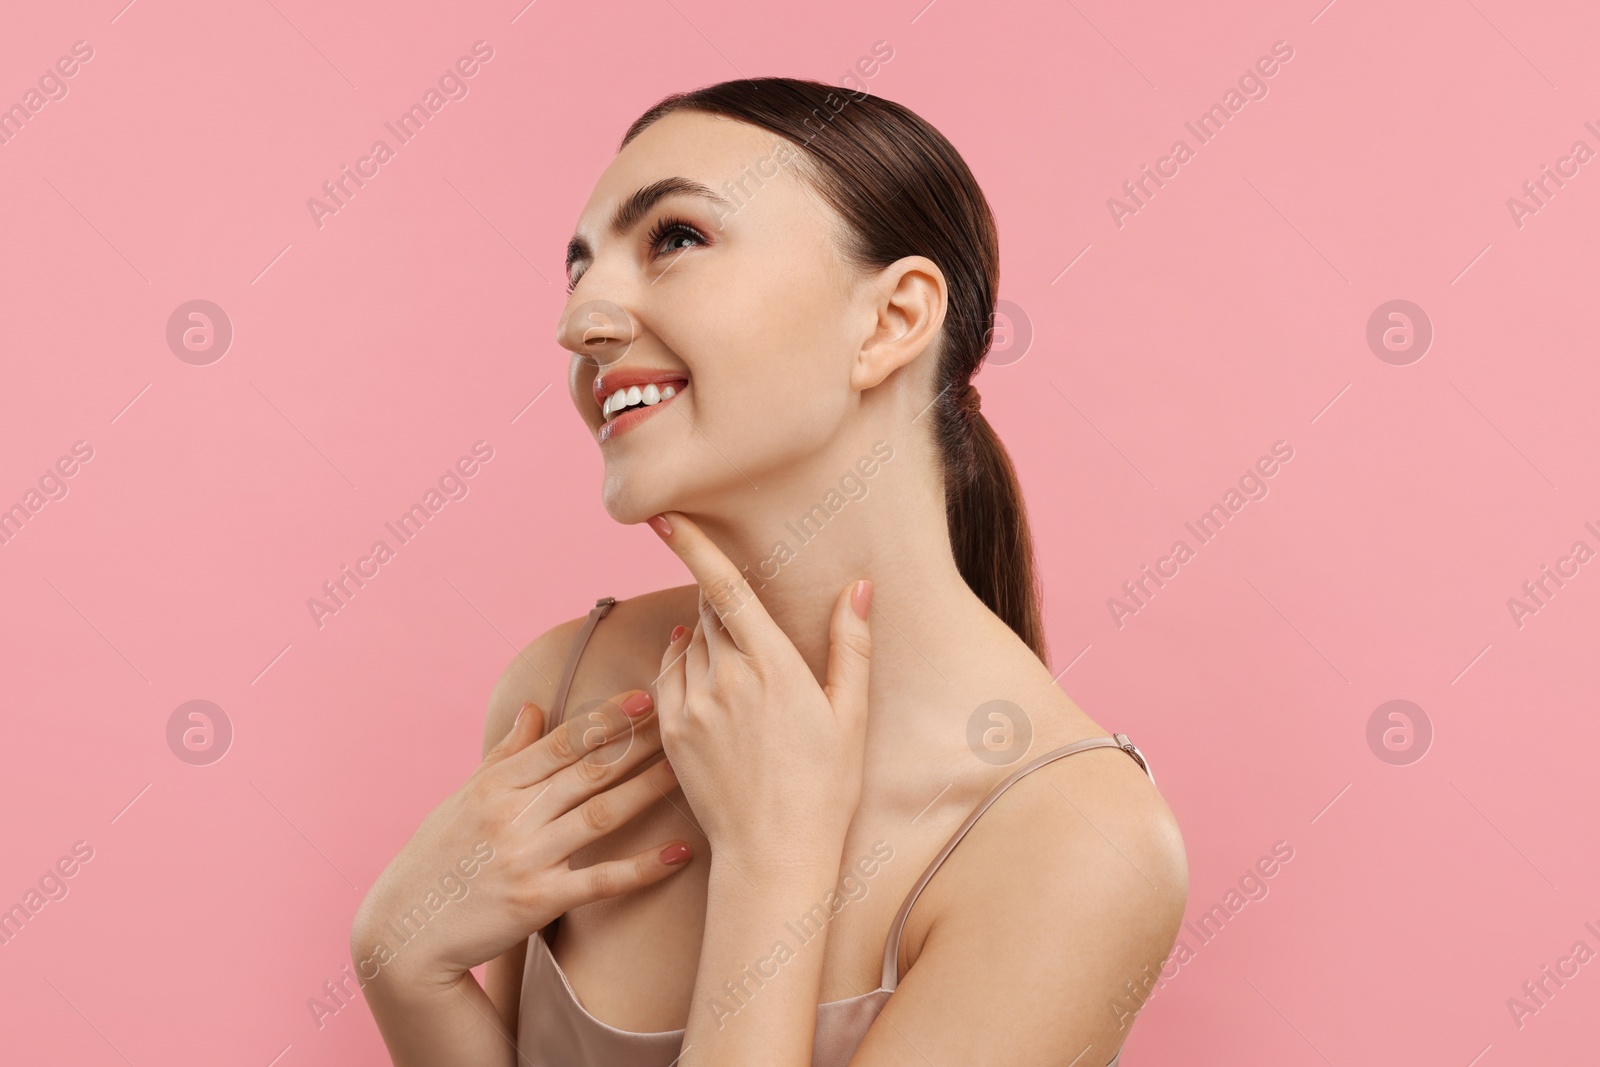 Photo of Smiling woman touching her neck on pink background